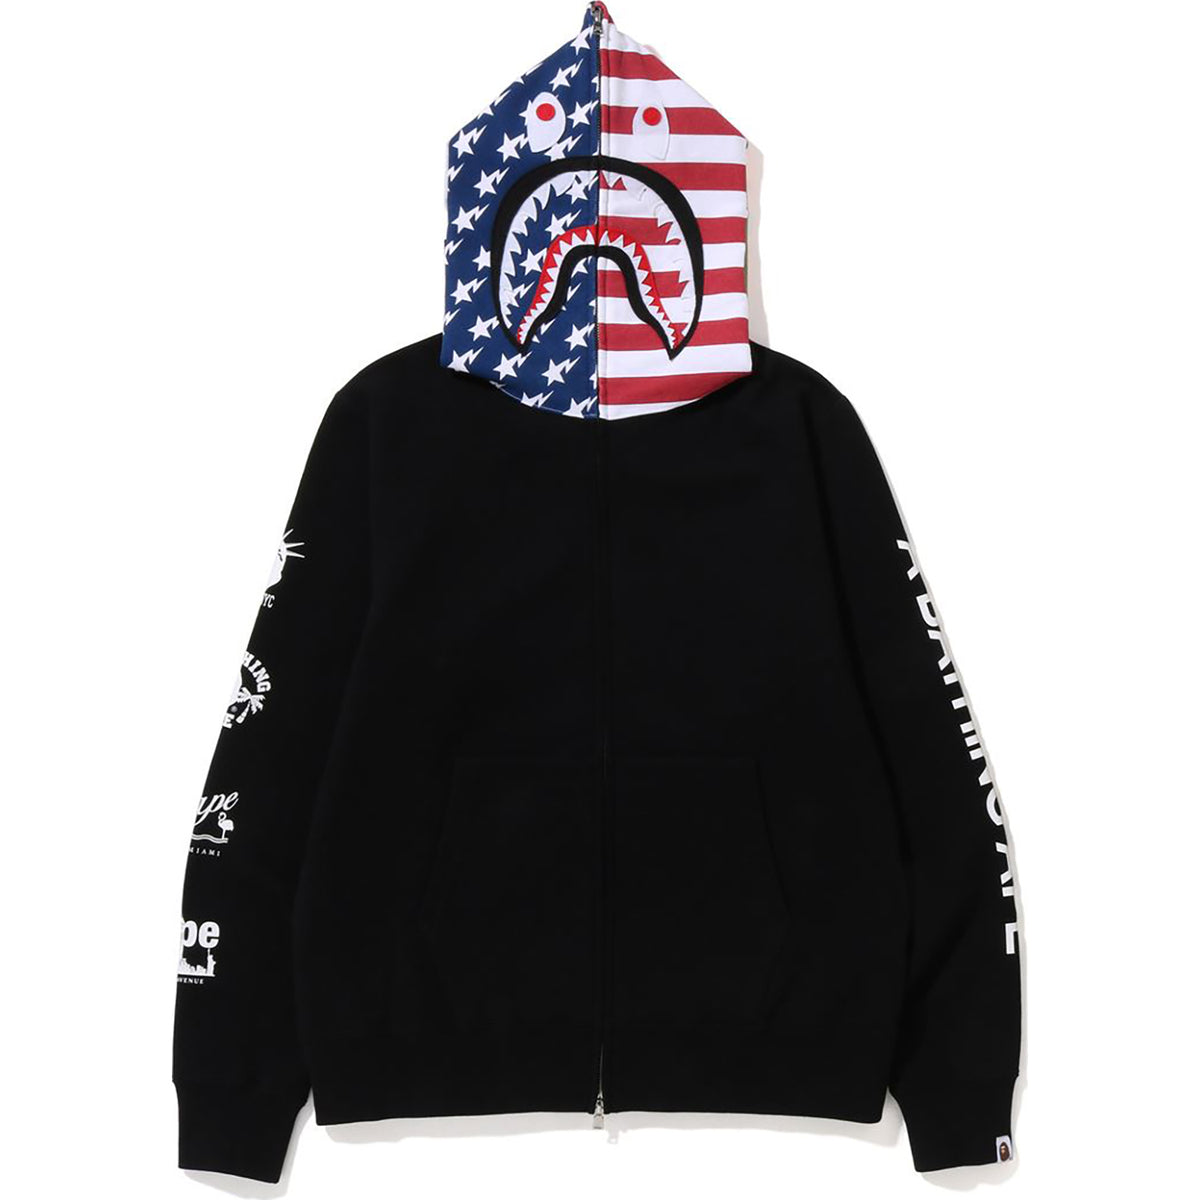 BAPE US LIMITED COLLECTION SHARK FULL ZIP HOODIE MENS